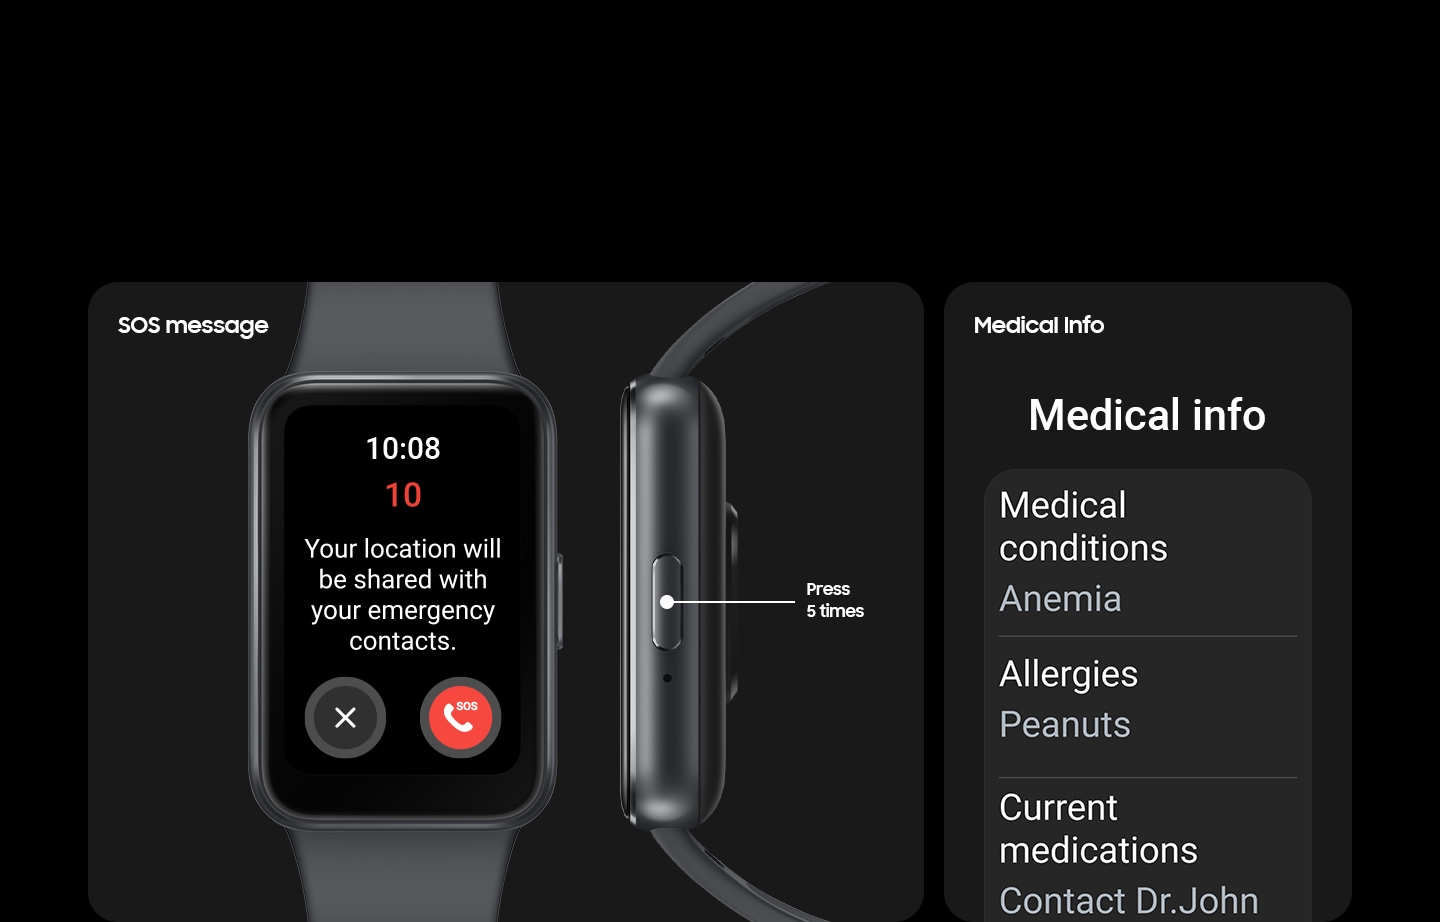 Galaxy Fit3 displaying the SOS Message screen with two buttons, Cancel and Emergency call. On its right is the Home button displayed with a text 'Press 5 times'. Next to it is the Medical info screen showing medical conditions, allergies and current medications.